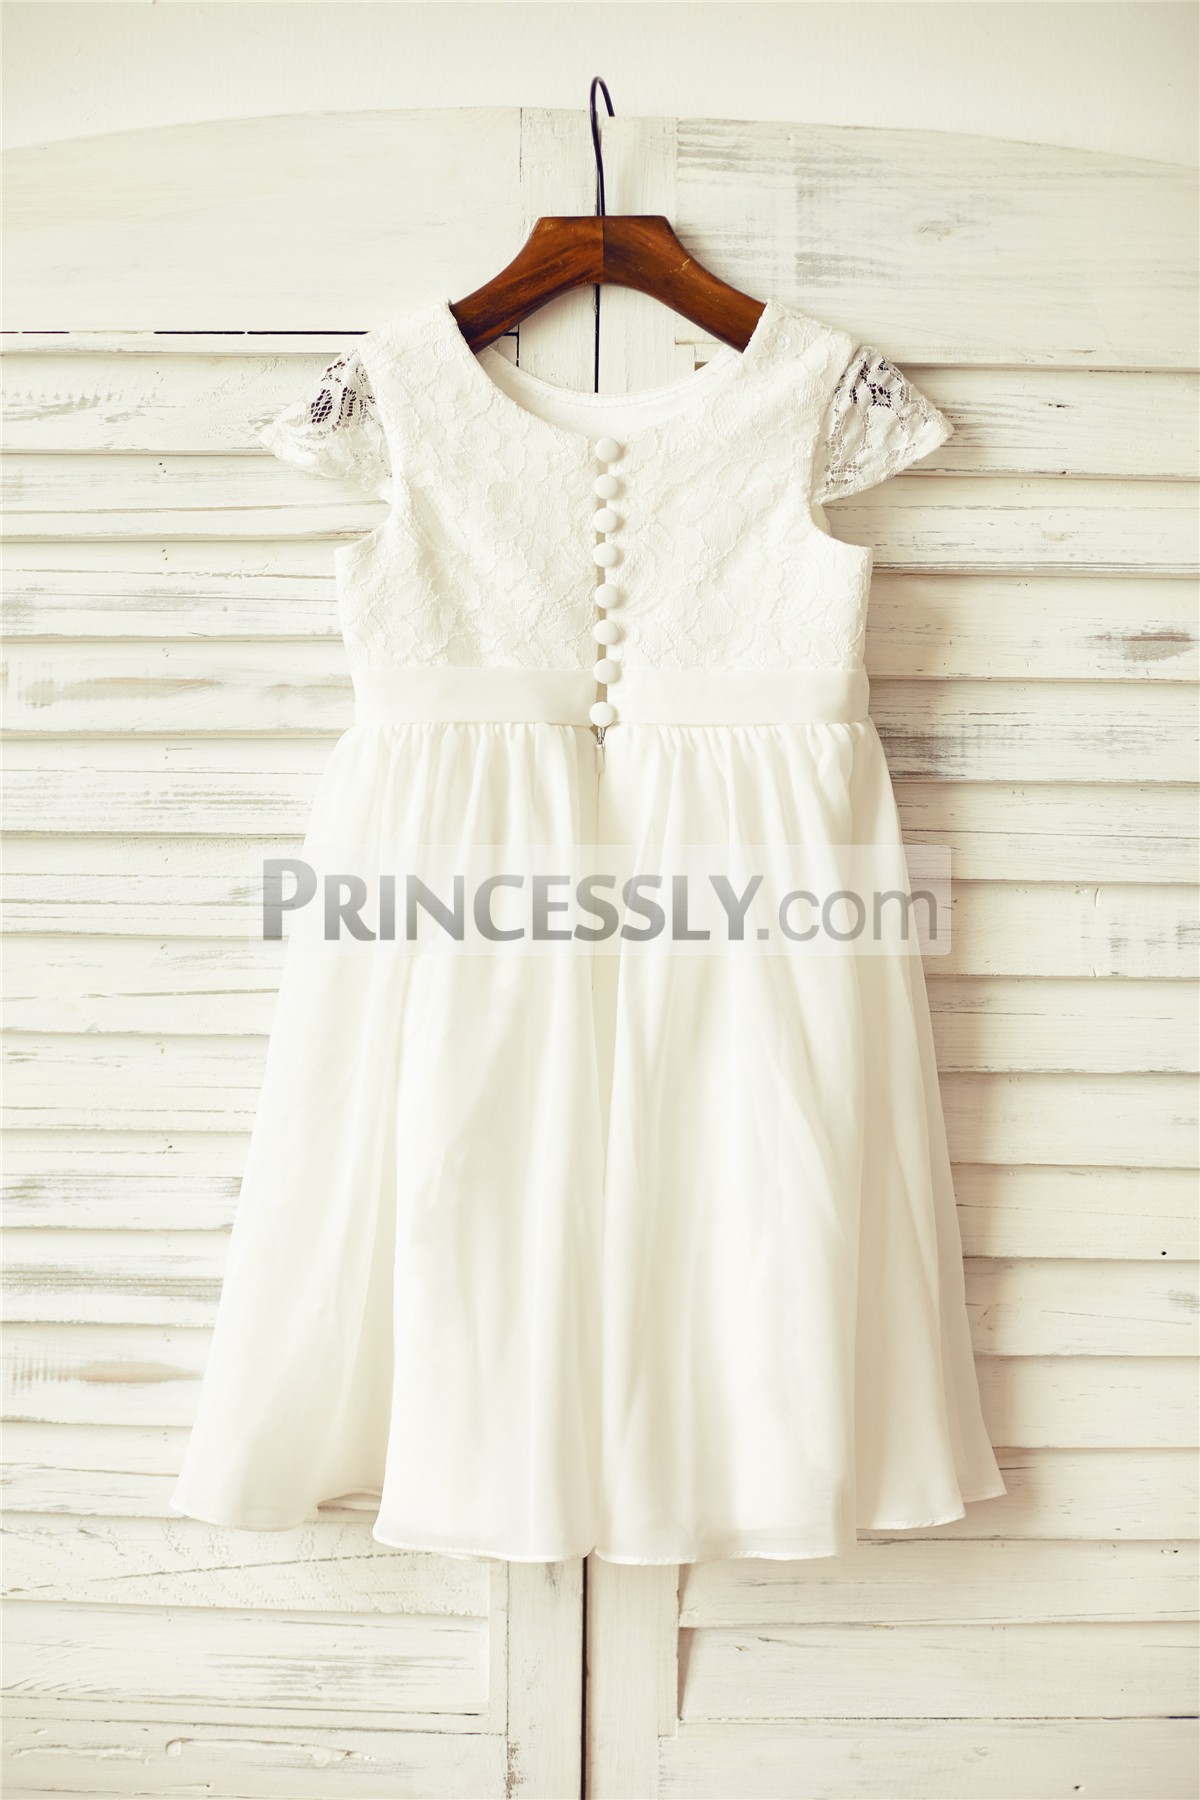 Ivory lace chiffon wedding baby girl dress with covered buttons